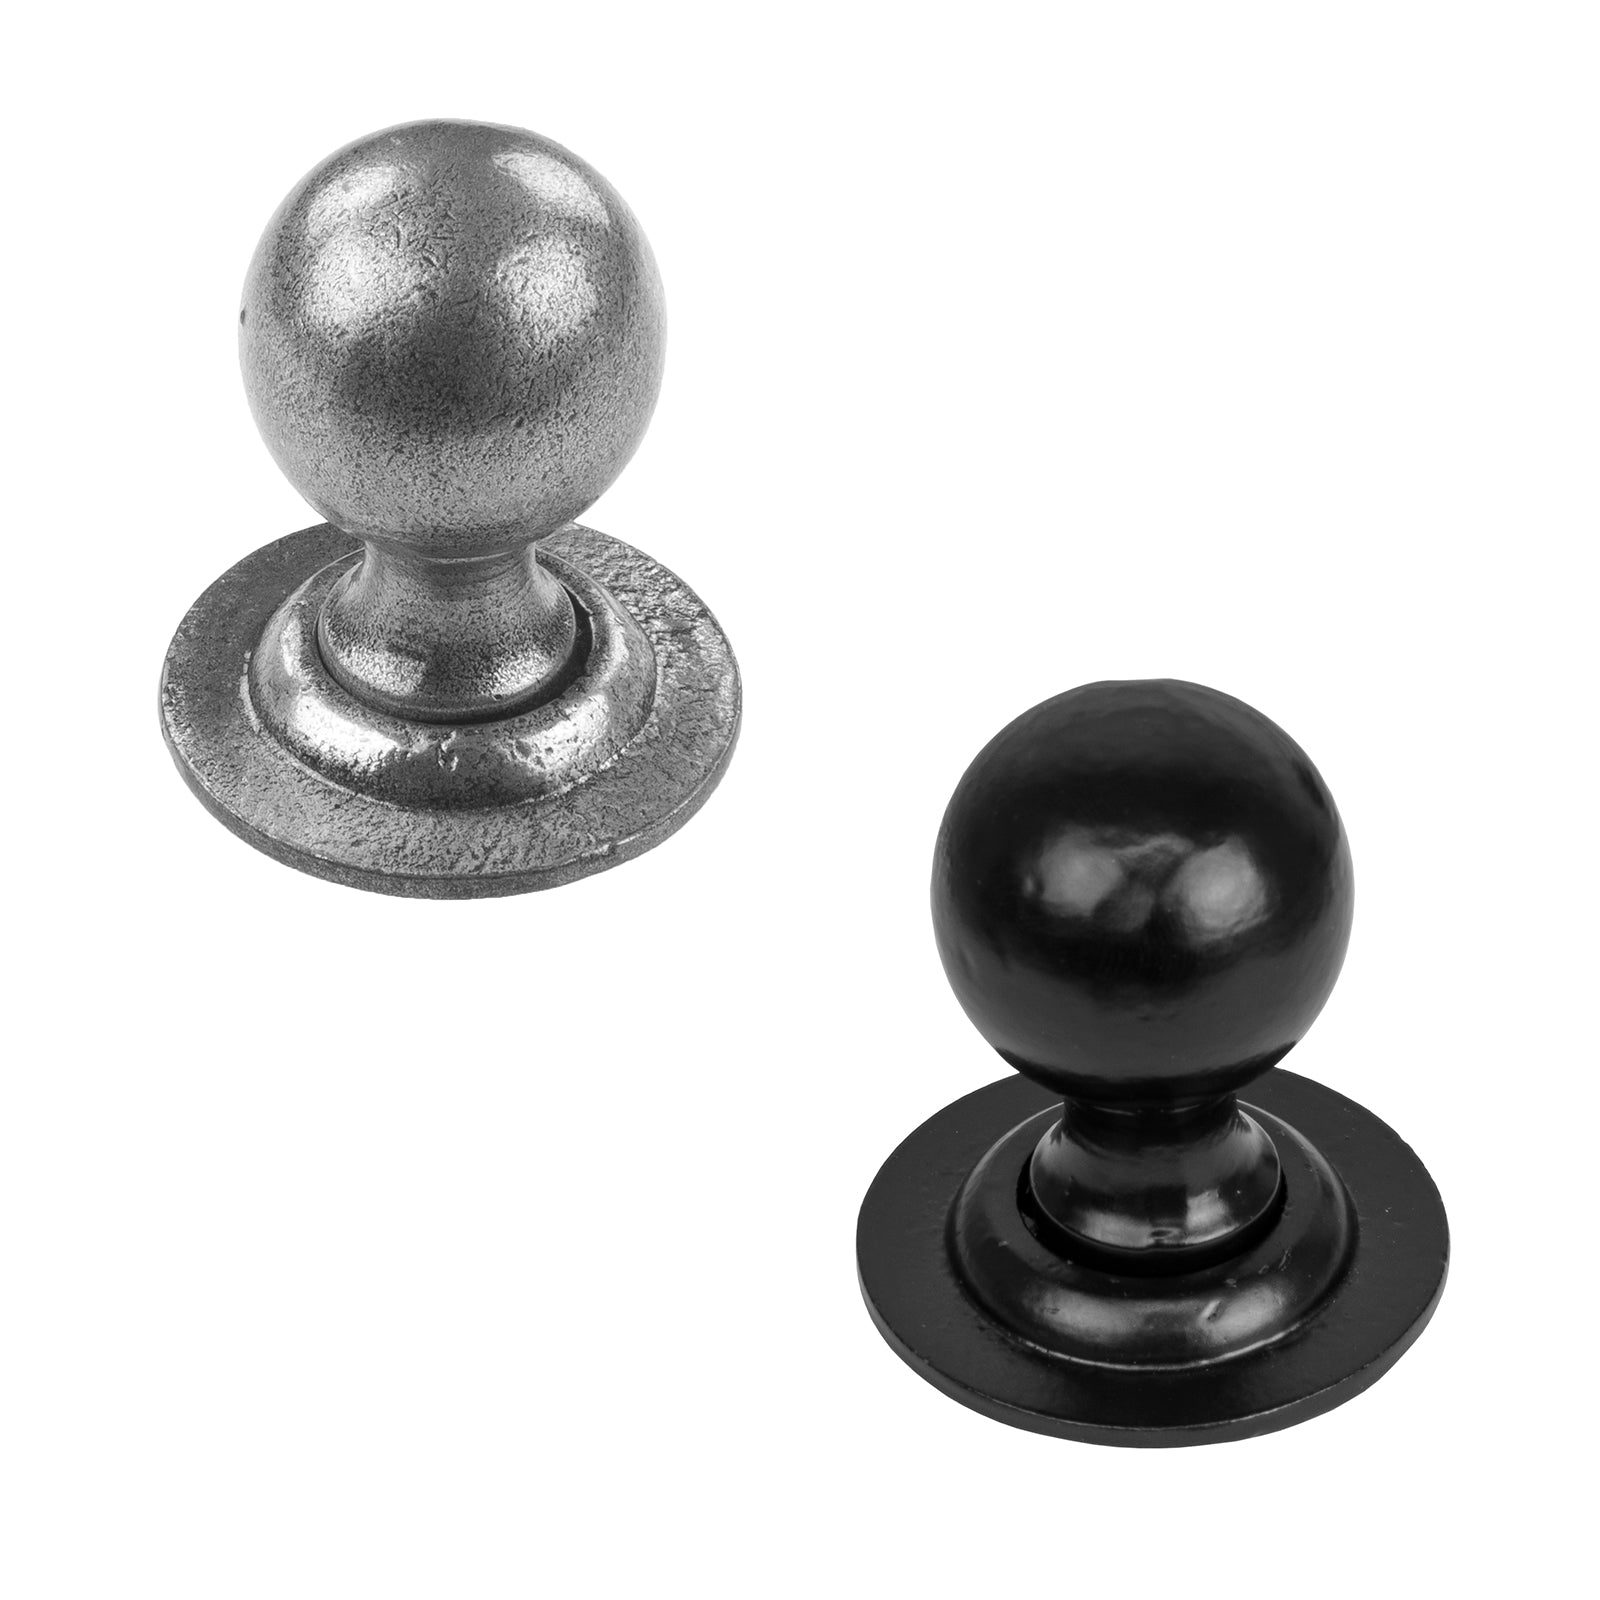 Round cast iron door knobs in black and pewter